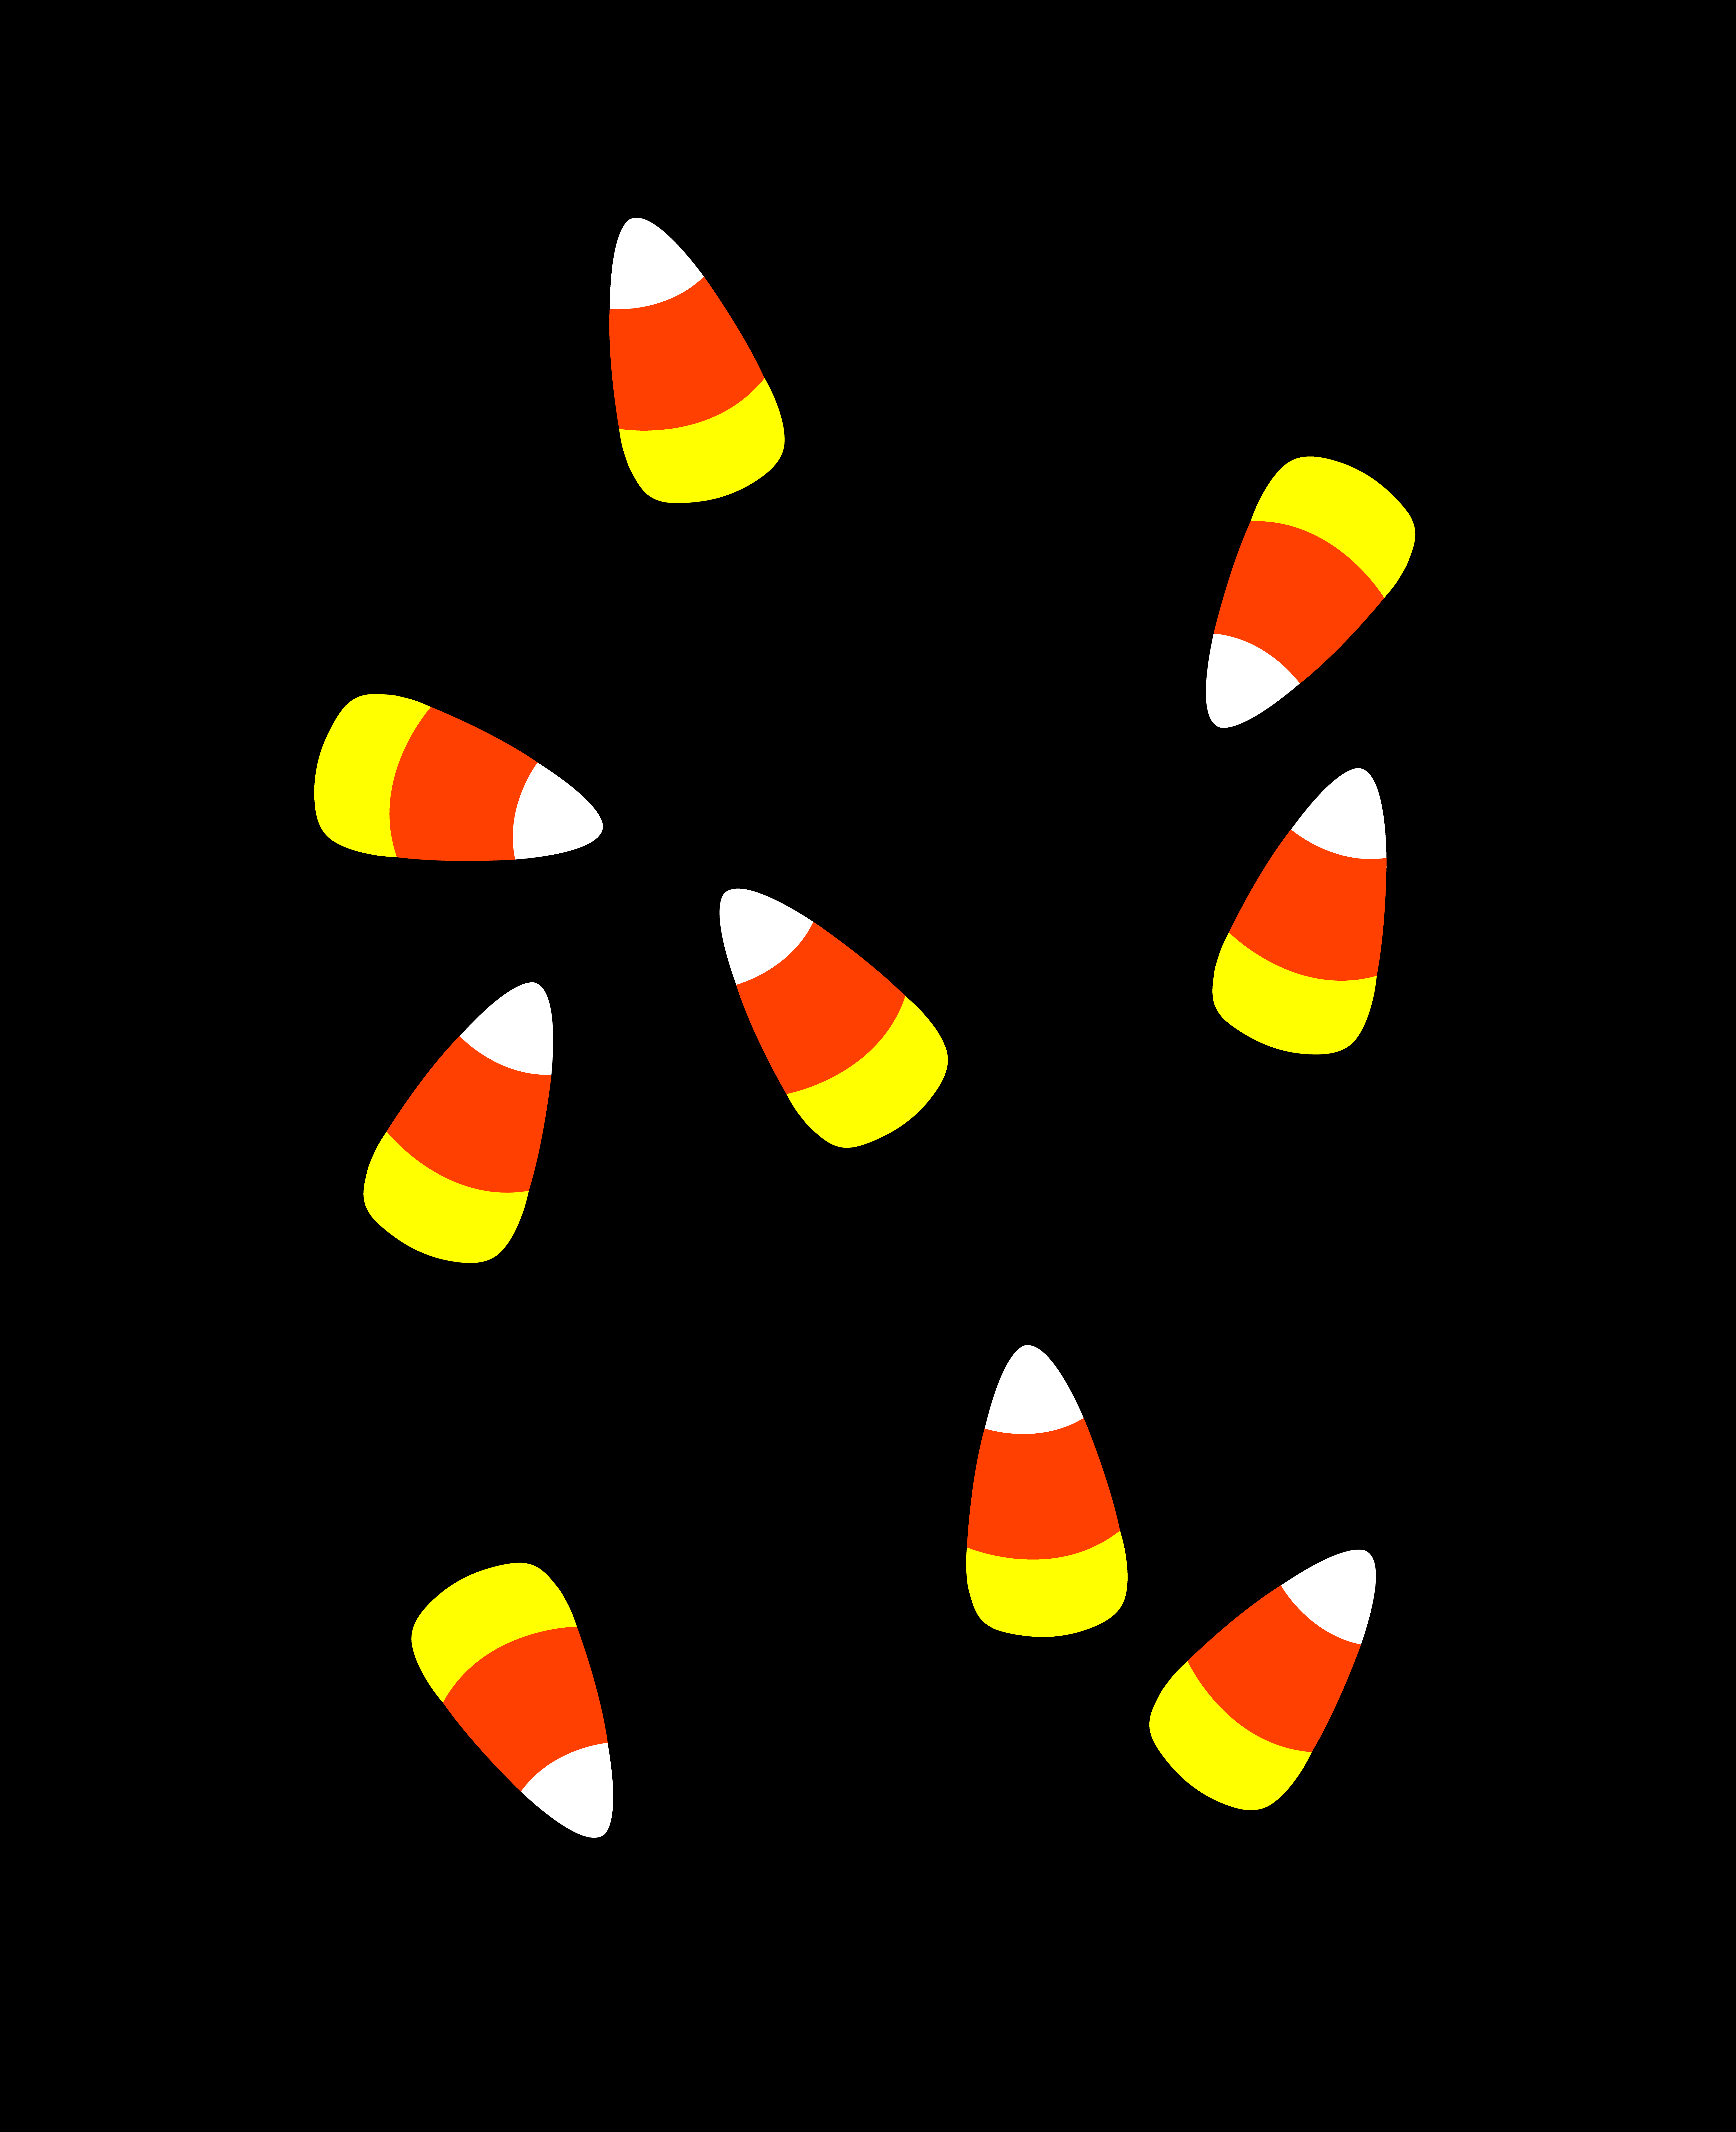 Candy corn halloween candyrn on black background free clip art